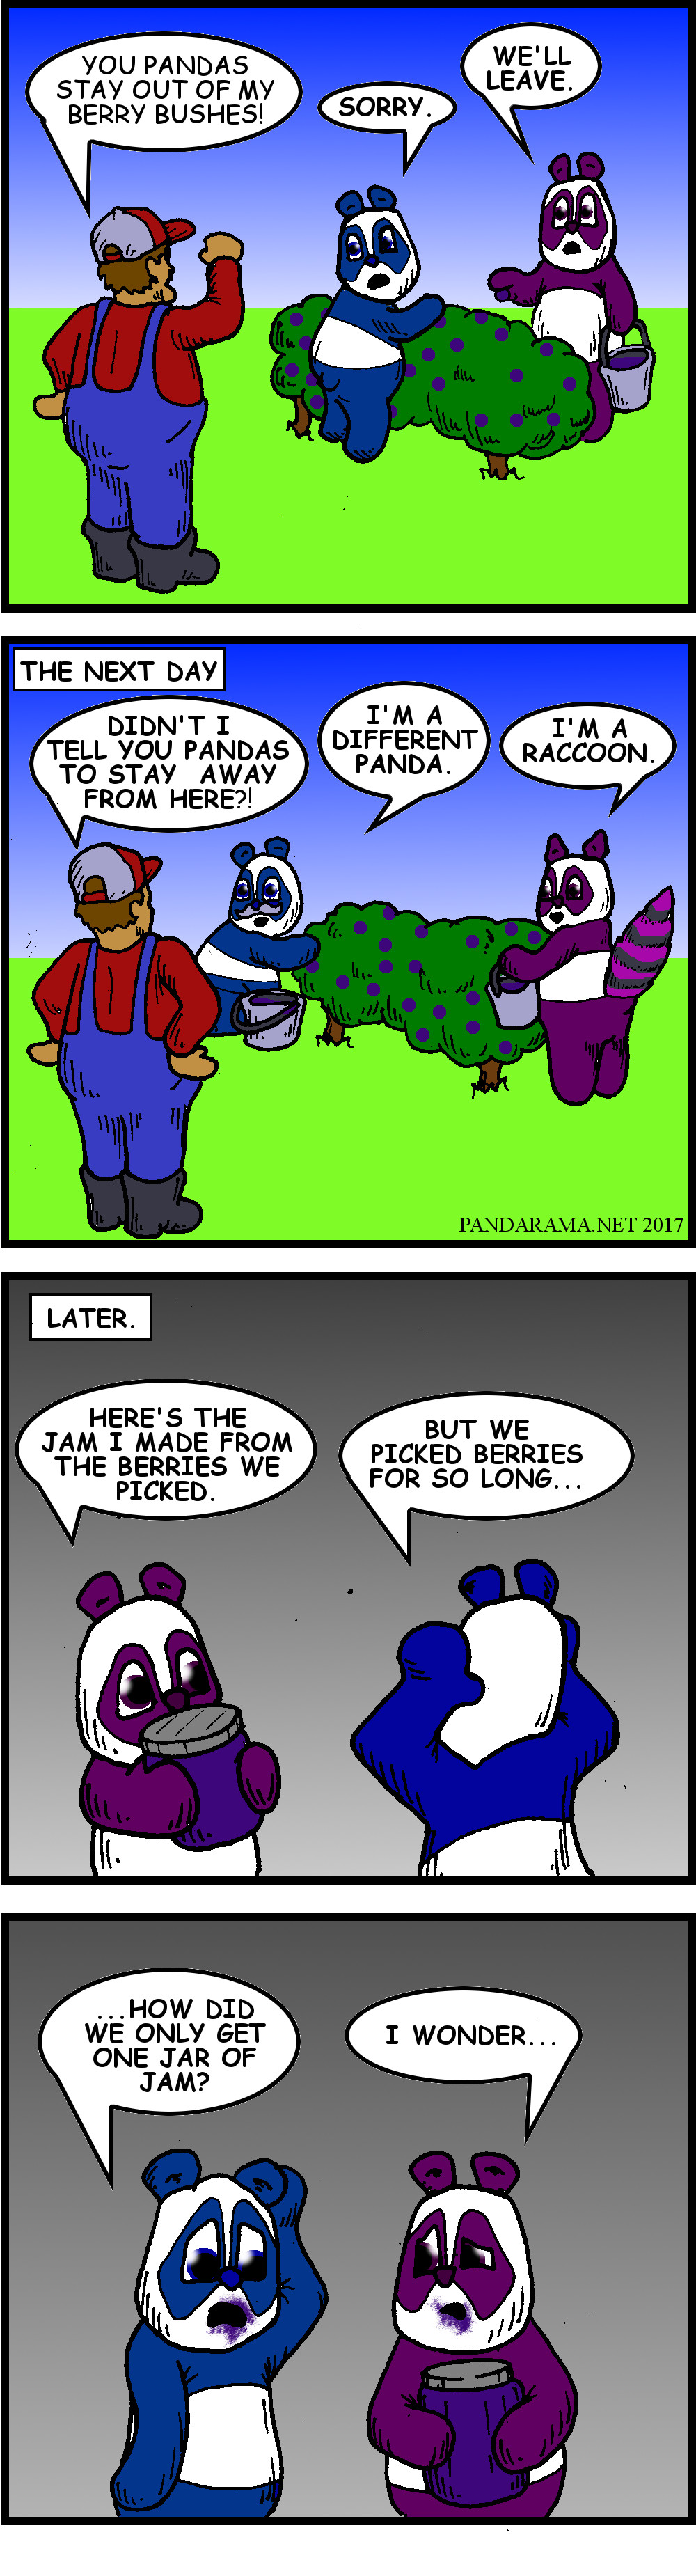 pandas are disappointed that days of berry picking only resulted in one jar of jam, because they were eating too many berries. berrypicking cartoon. berry-picking.